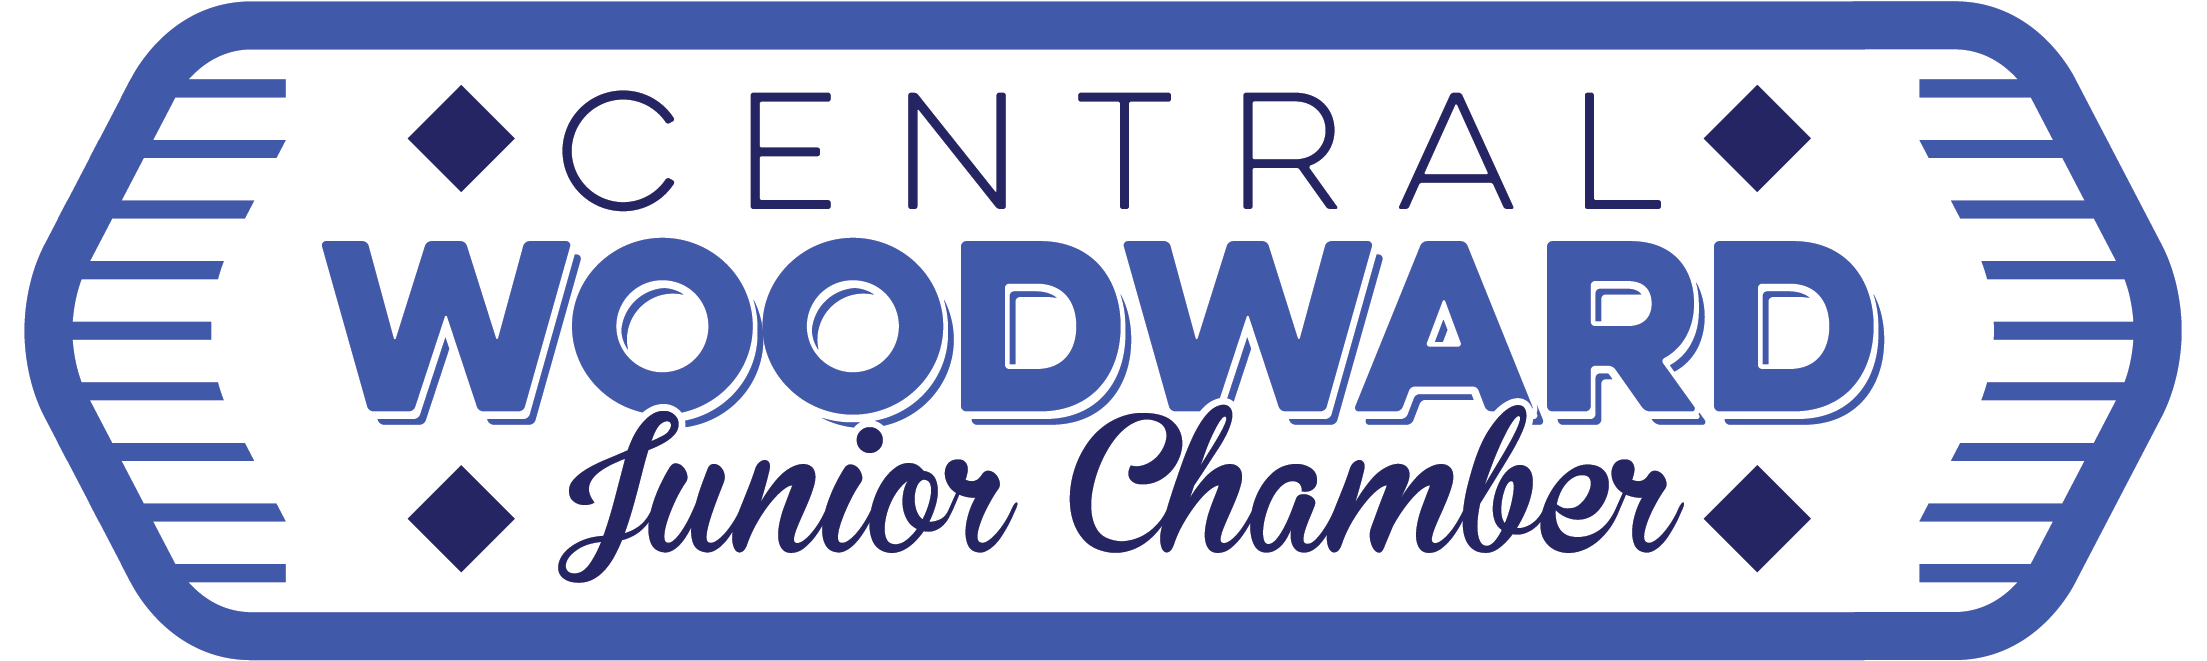 Central Woodward Junior Chamber